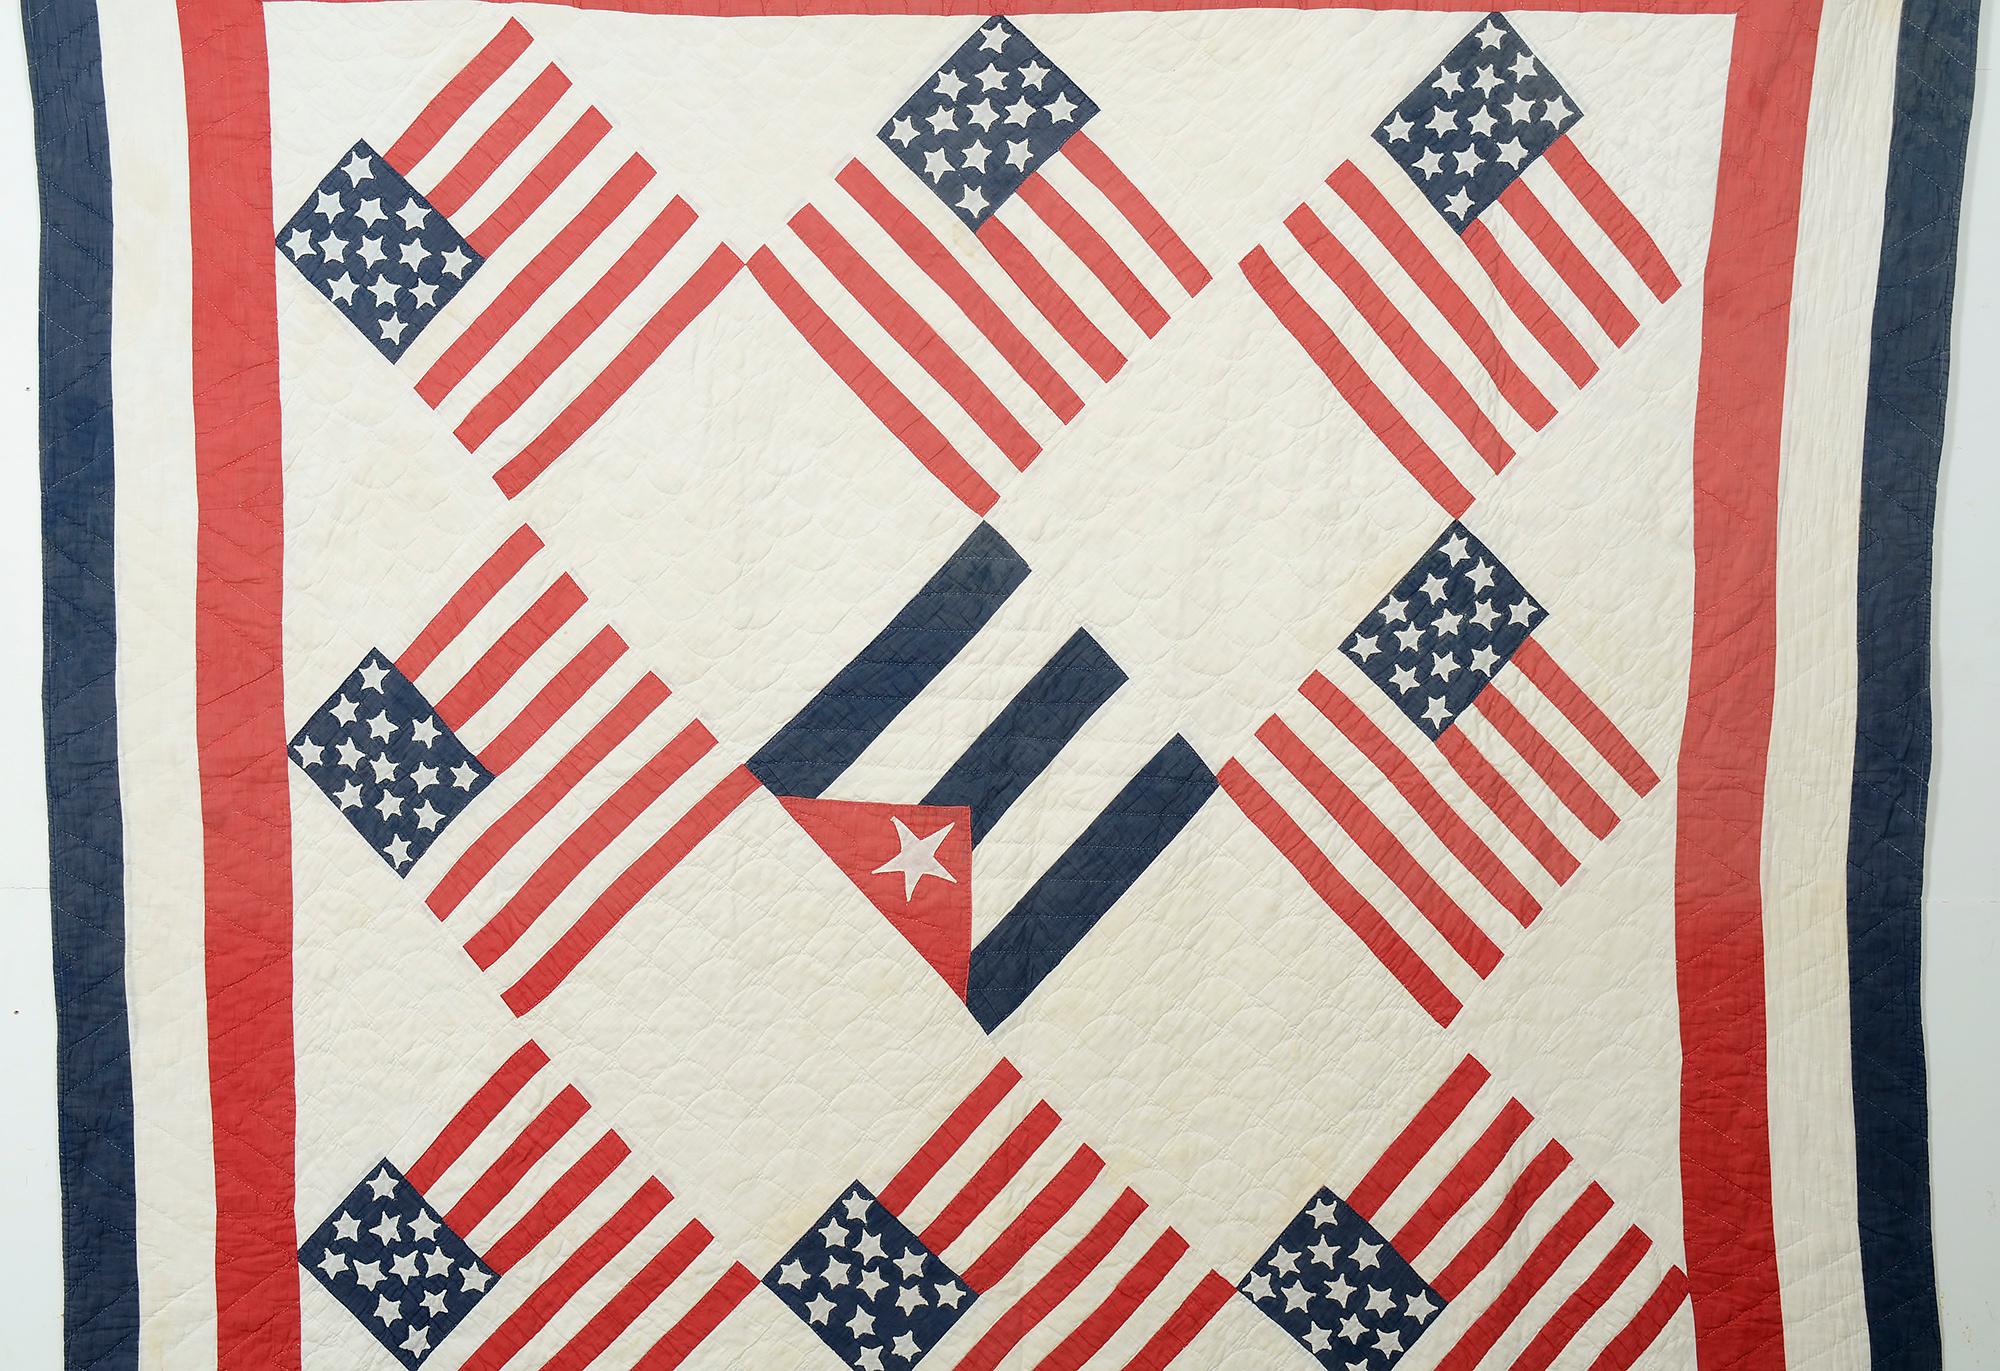 This patriotic quilt was made to commemorate the Spanish American War that took place for 10 weeks in 1898. The main issue was Cuban independence from Spain. Revolts had been occurring for some years in Cuba against Spanish colonial rule. Spain